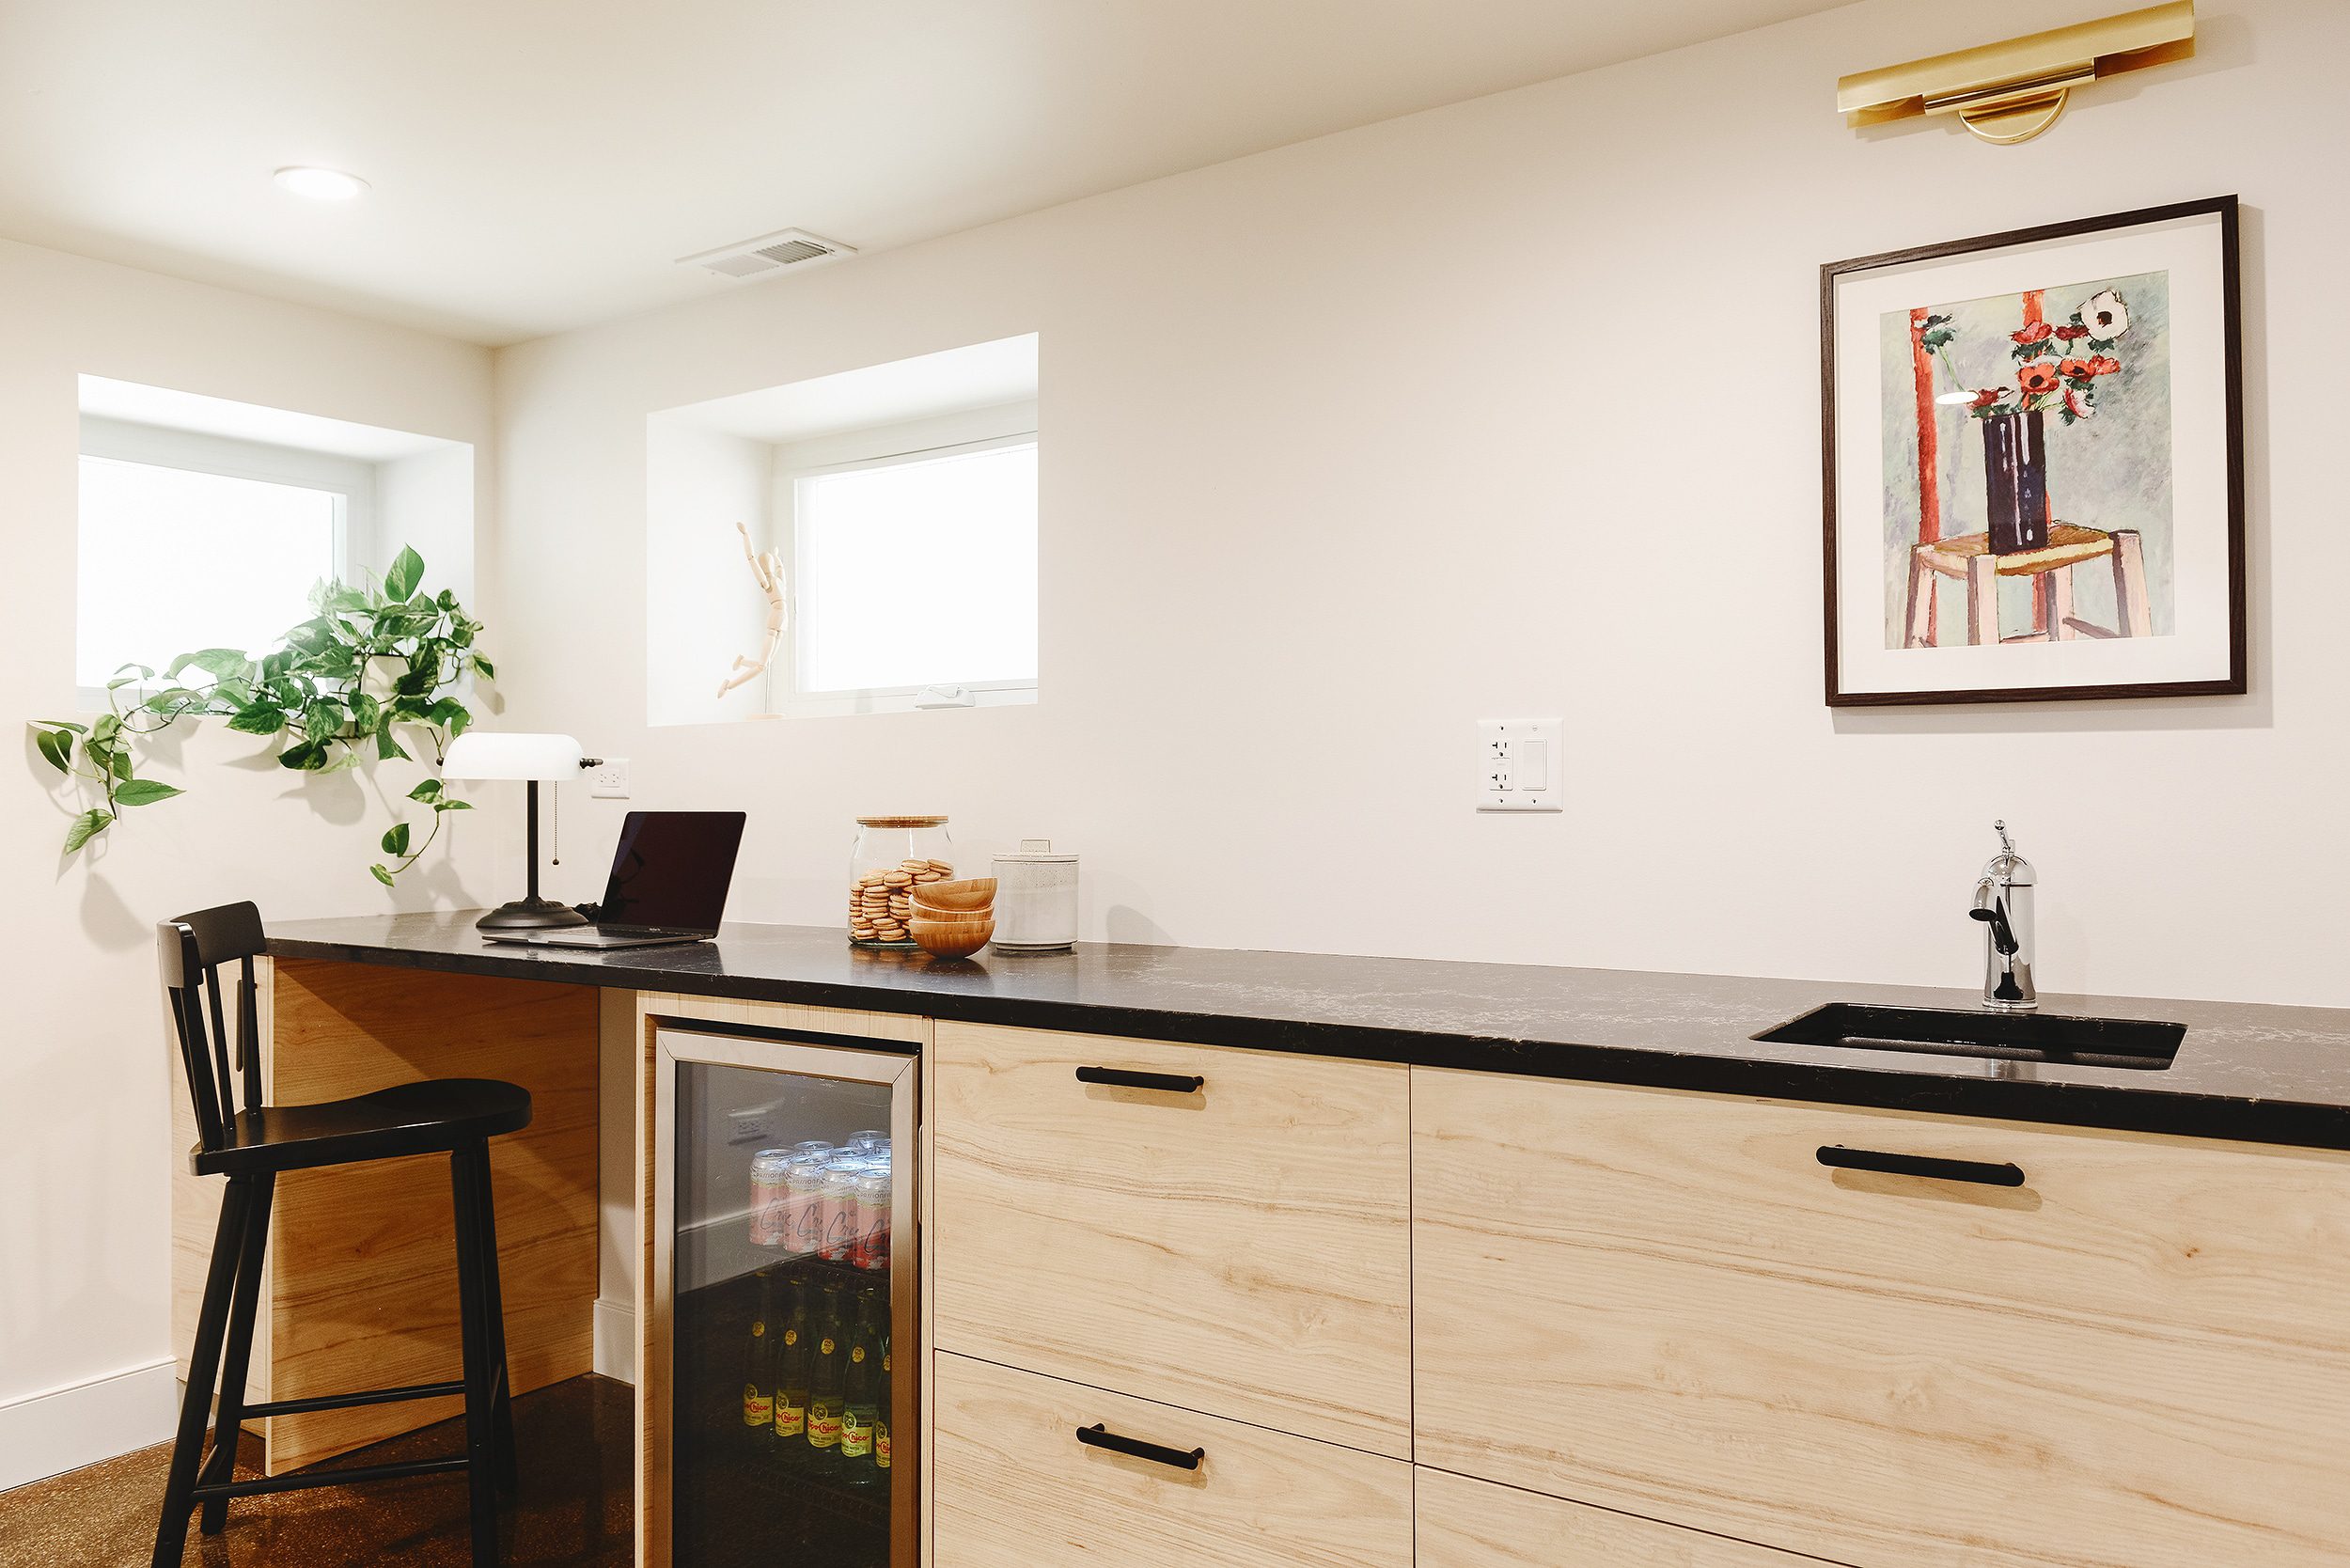 Our IKEA kitchenette, view from the side | via Yellow Brick Home